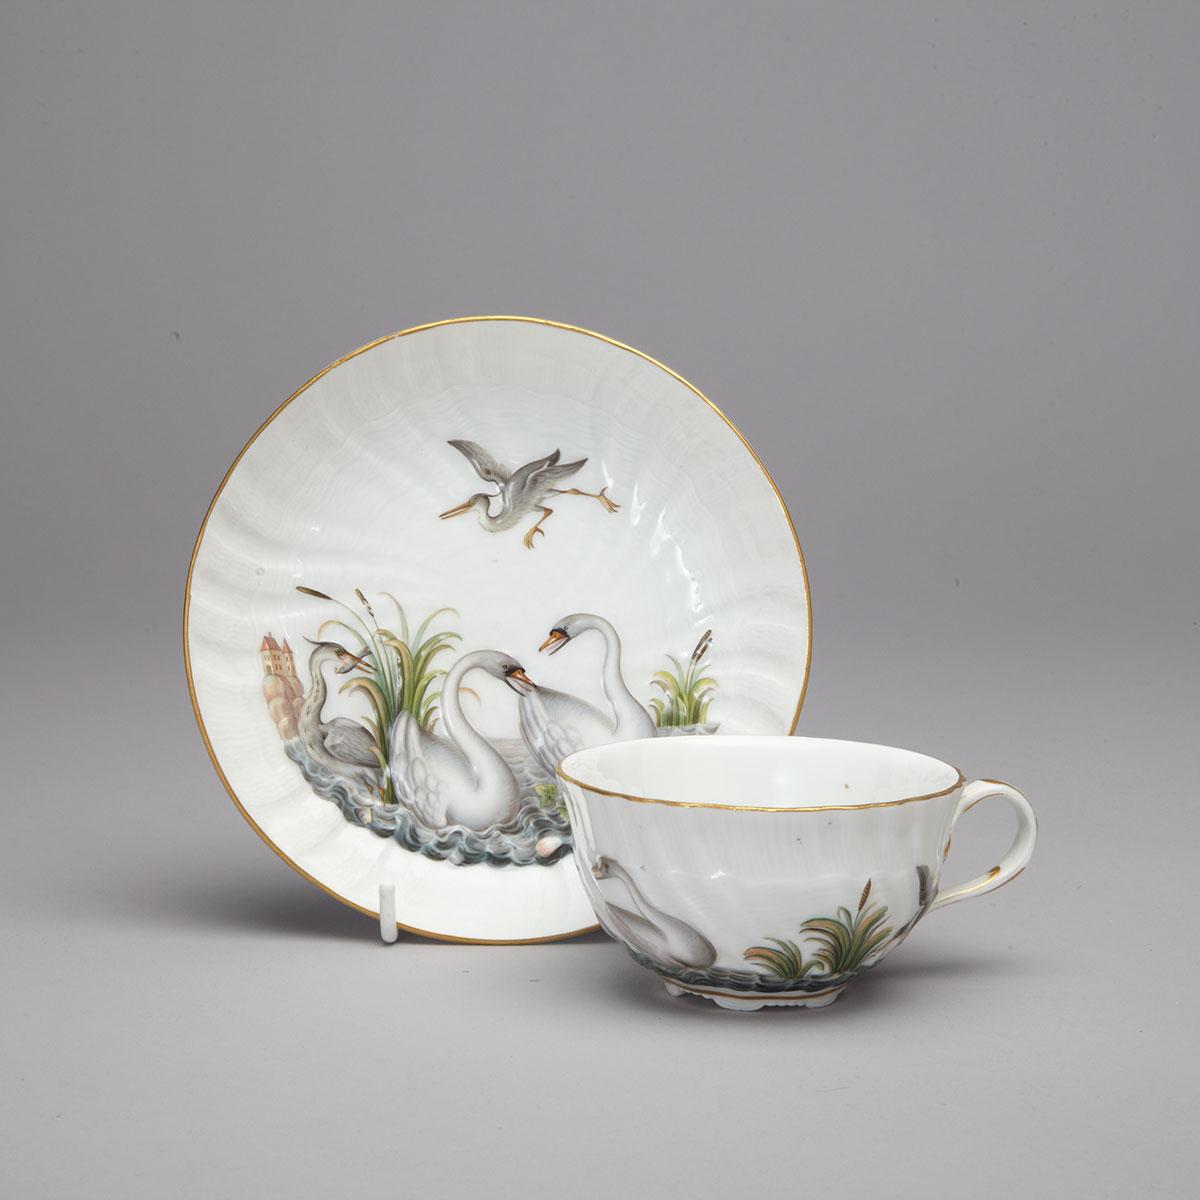 Meissen ‘Swan’ Pattern Tea Cup and Saucer, late 19th/early 20th century